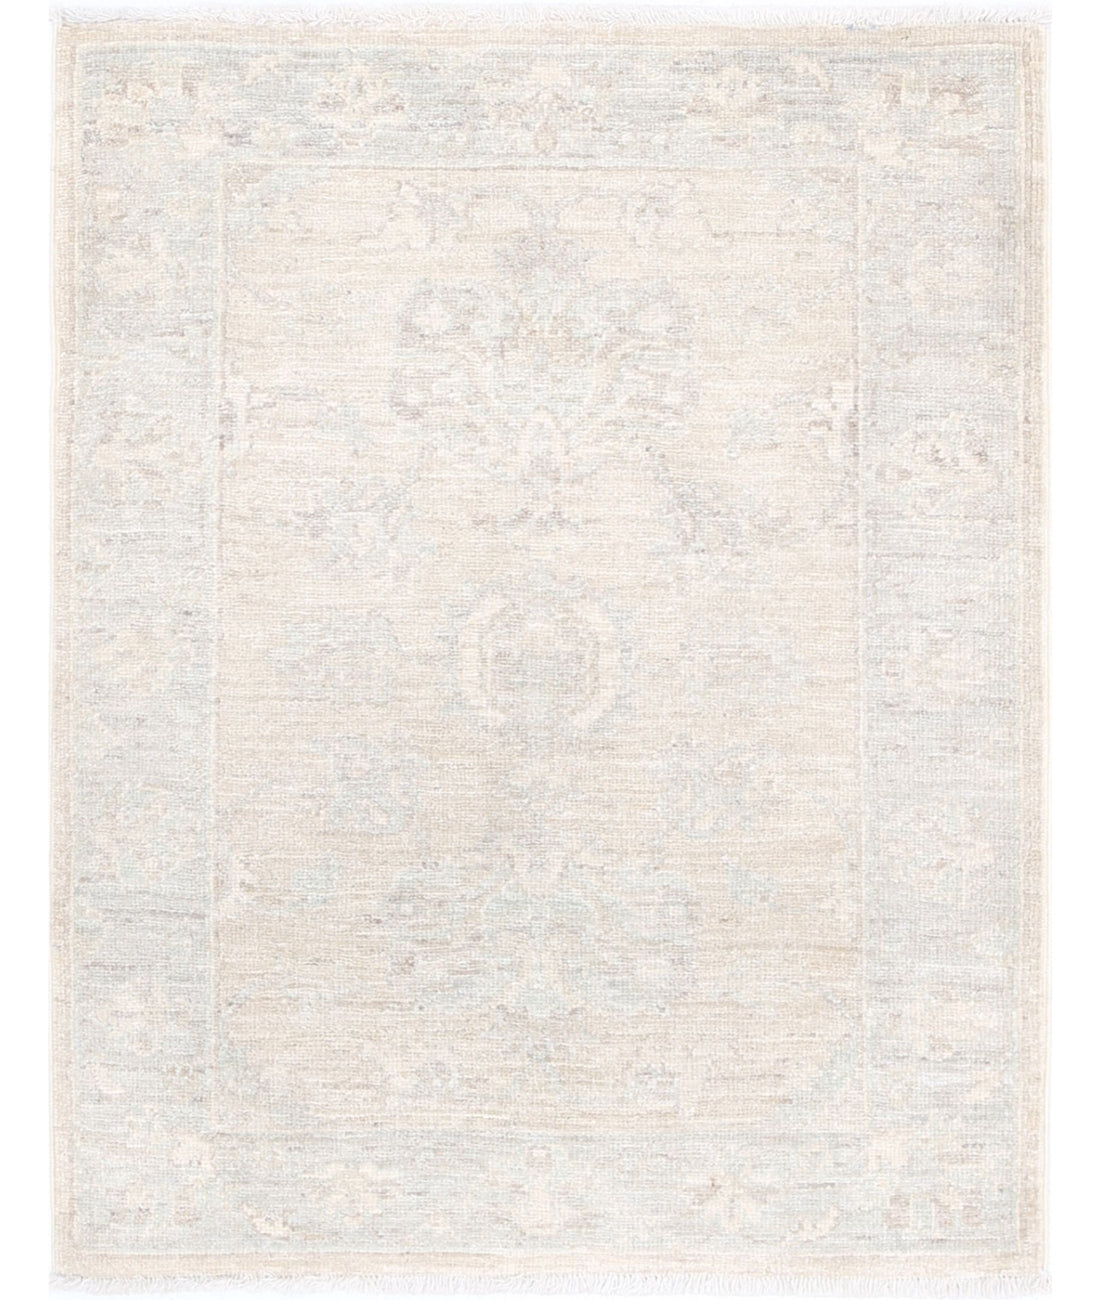 Hand Knotted Serenity Wool Rug - 2'3'' x 2'9'' 2'3'' x 2'9'' (68 X 83) / Brown / Grey